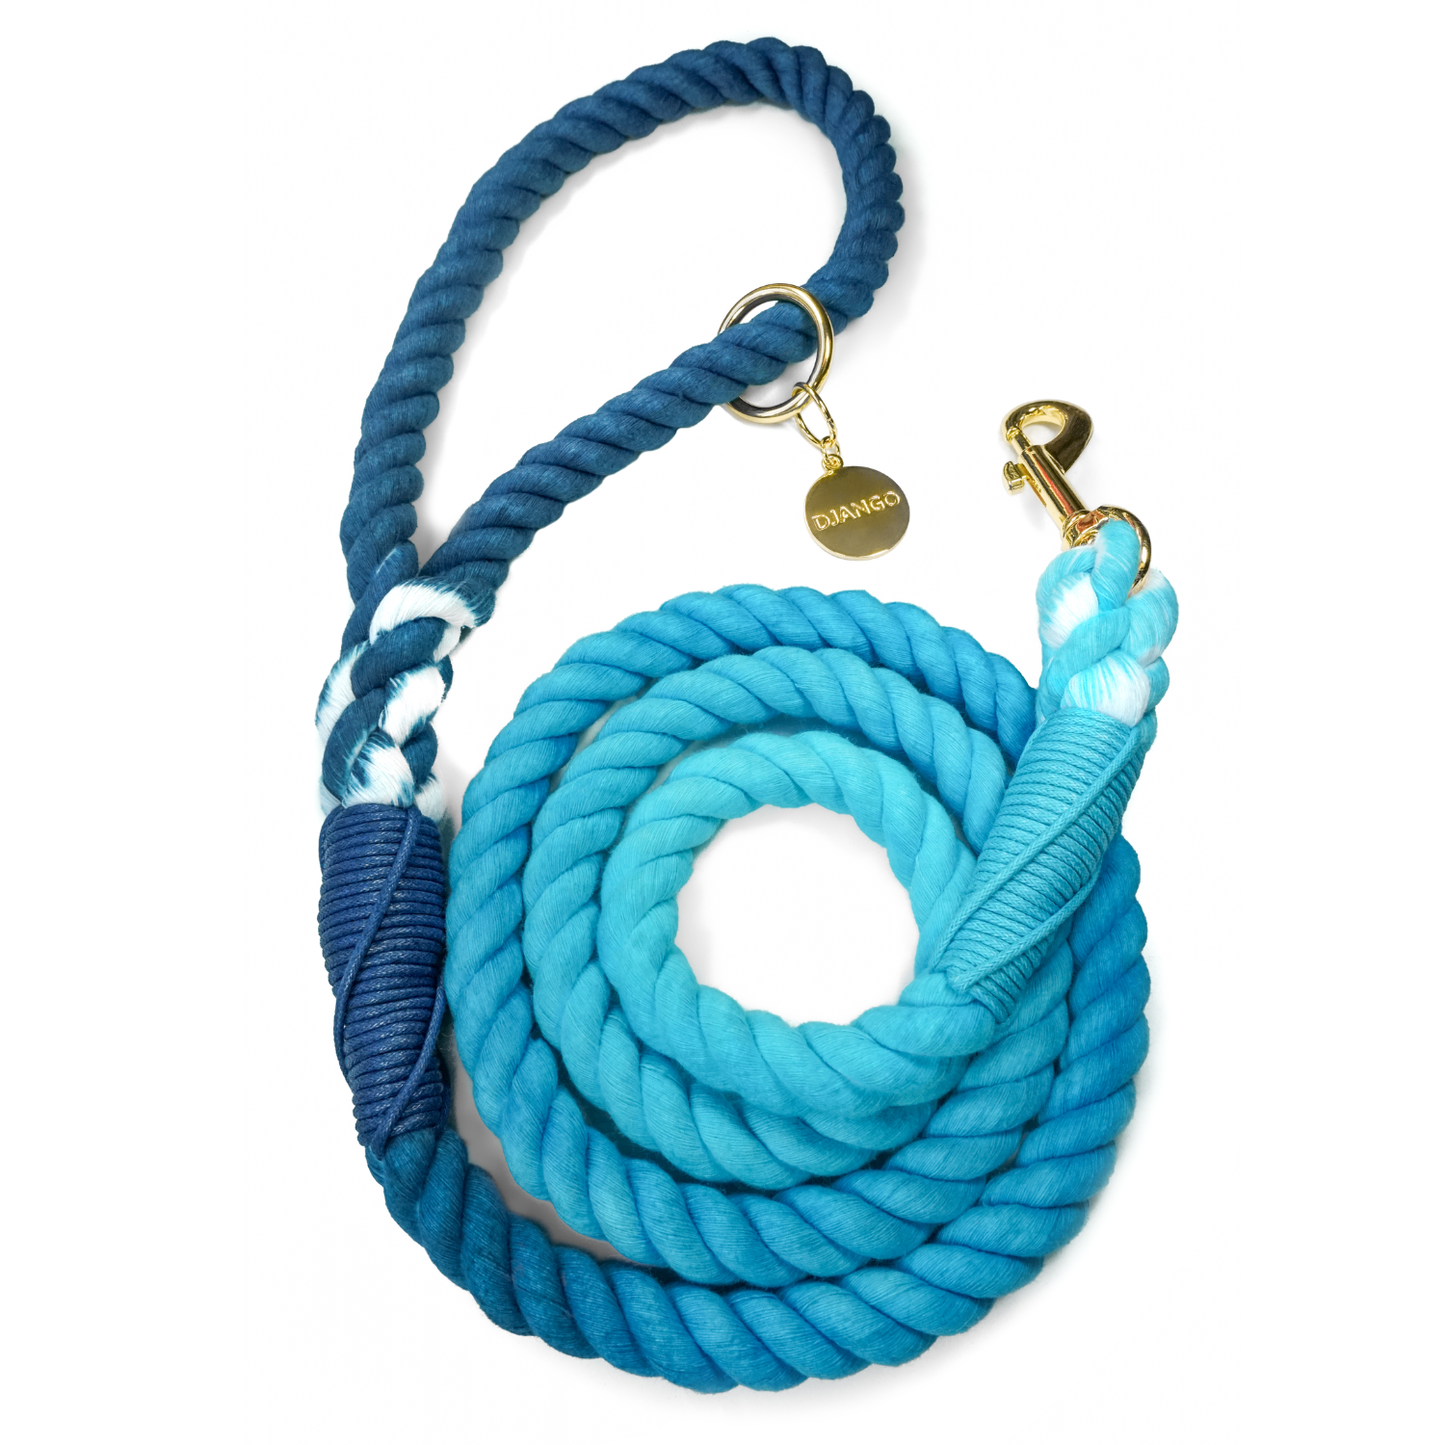 Cotton Rope Dog Leash Pacific Blue Image